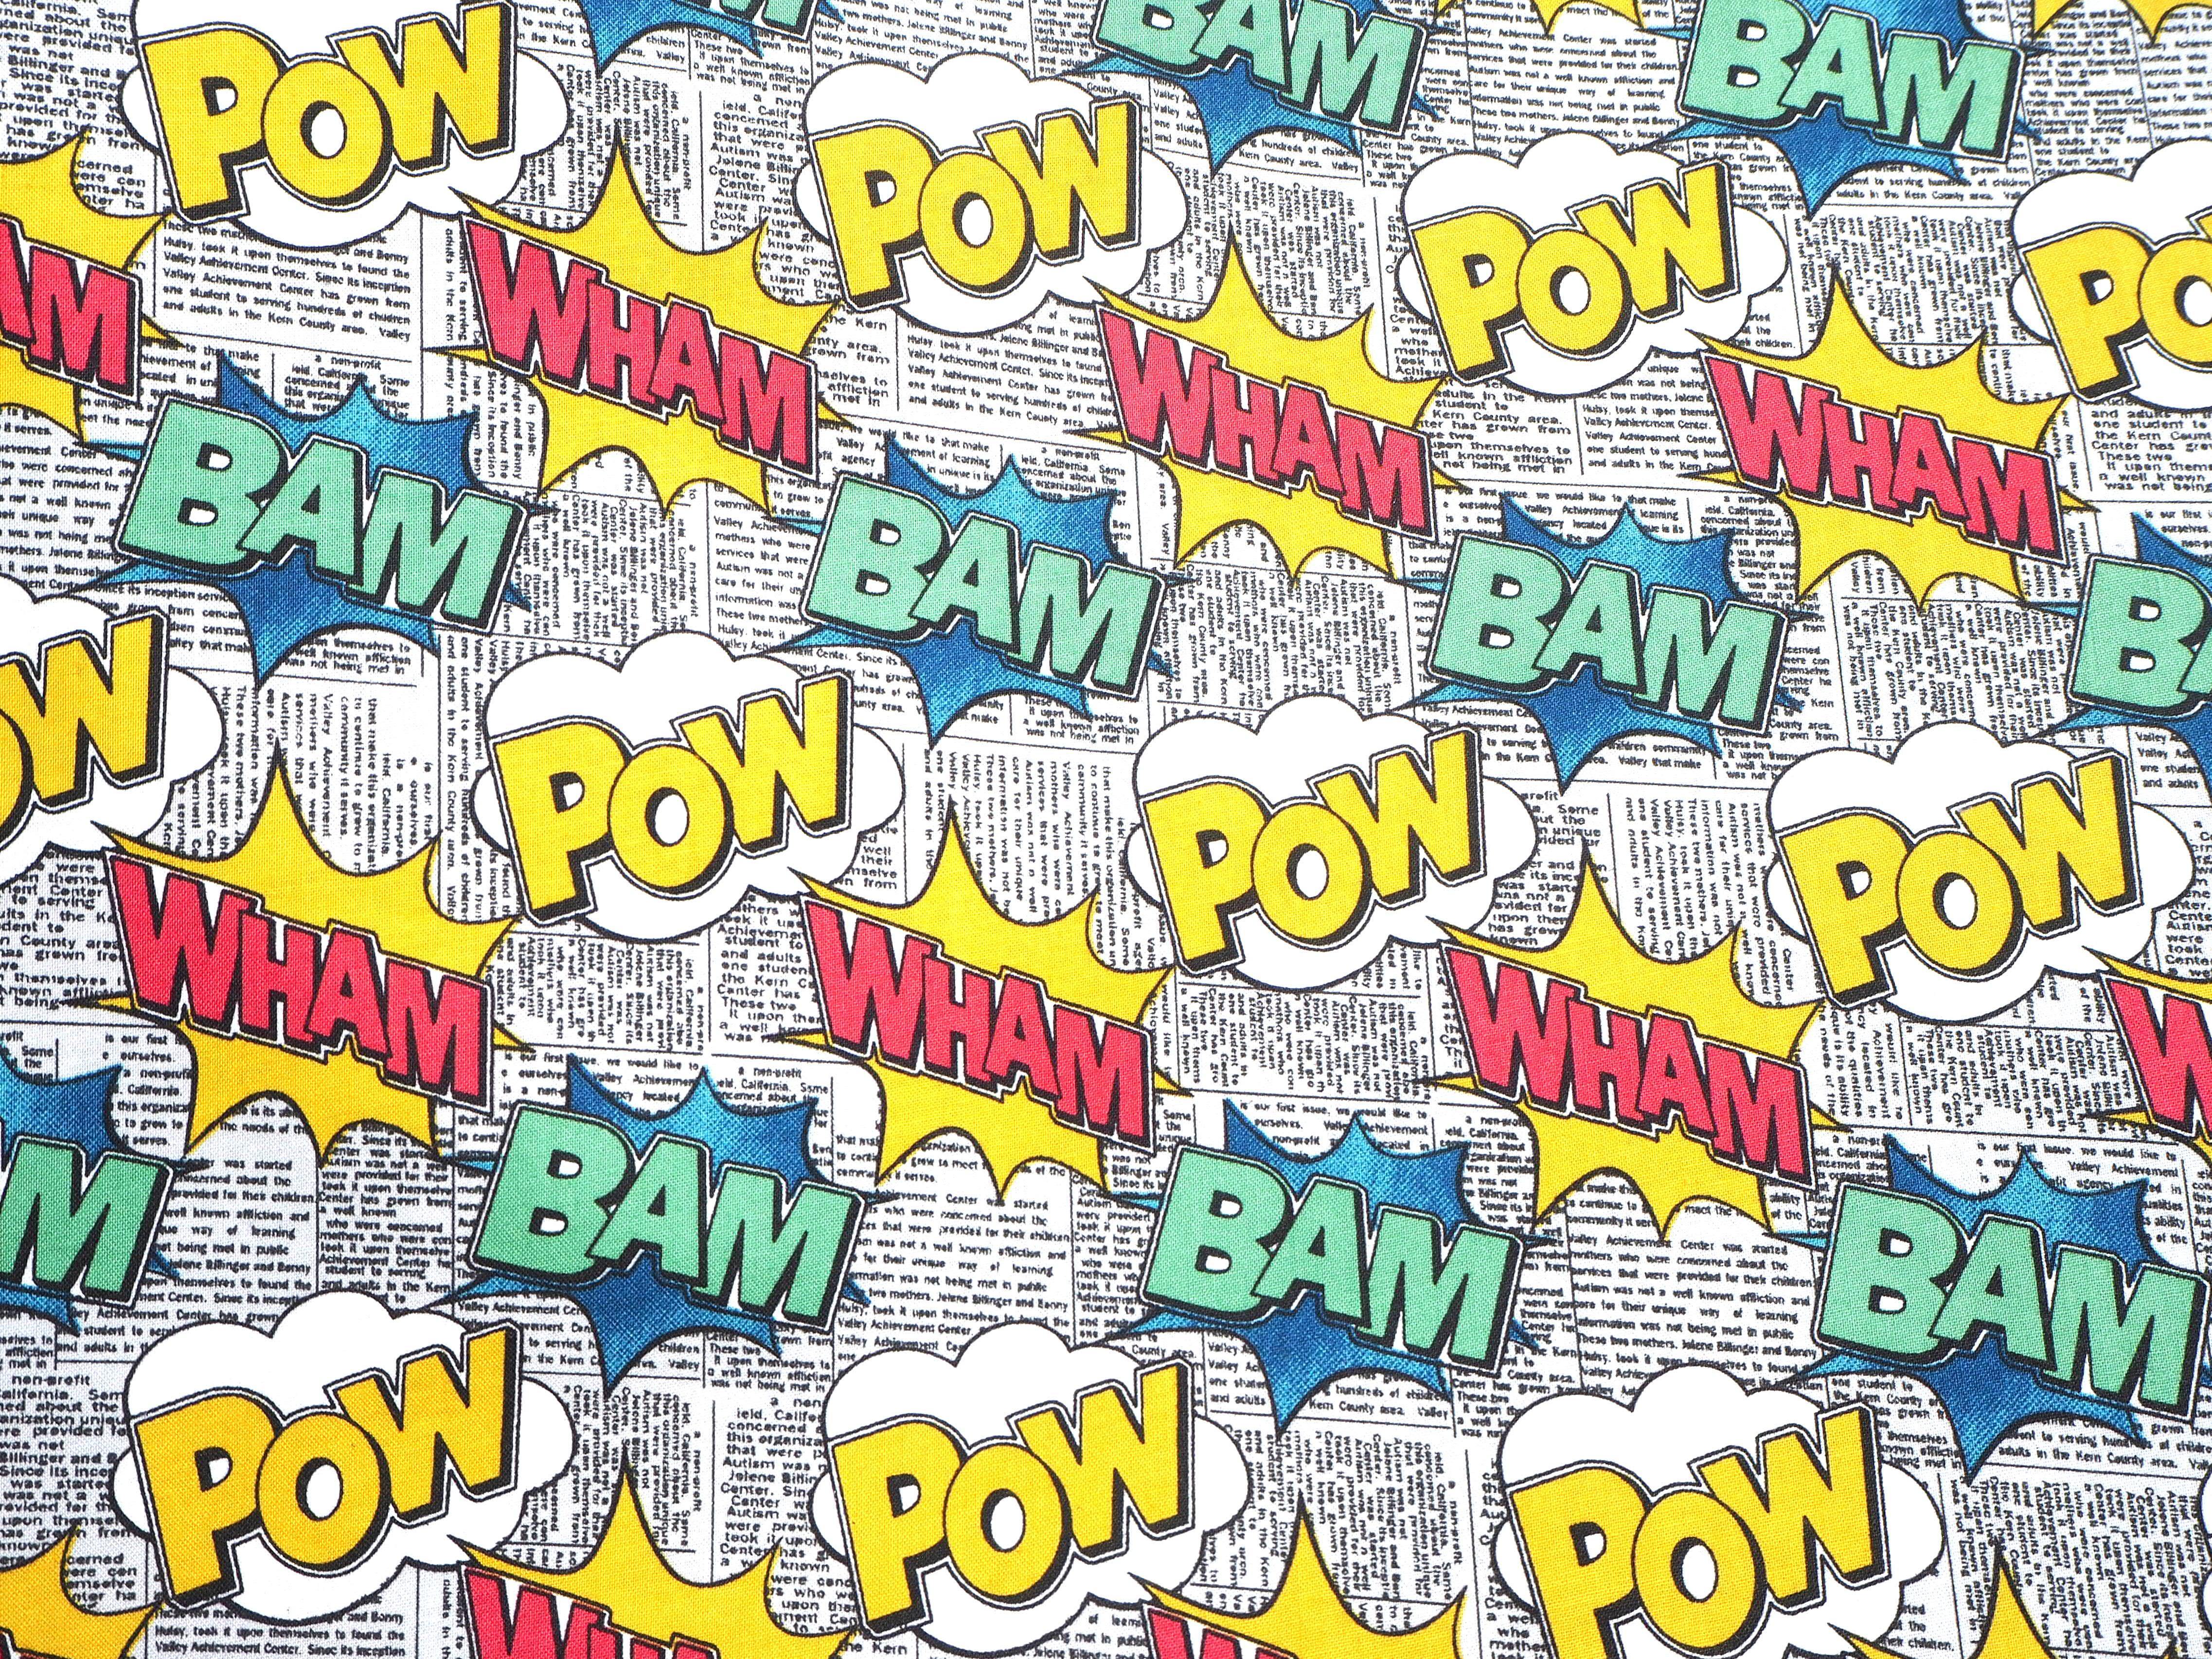 Wham! Bam! Pow! - Action Words on Newspaper Print themed 100% cotton fabric